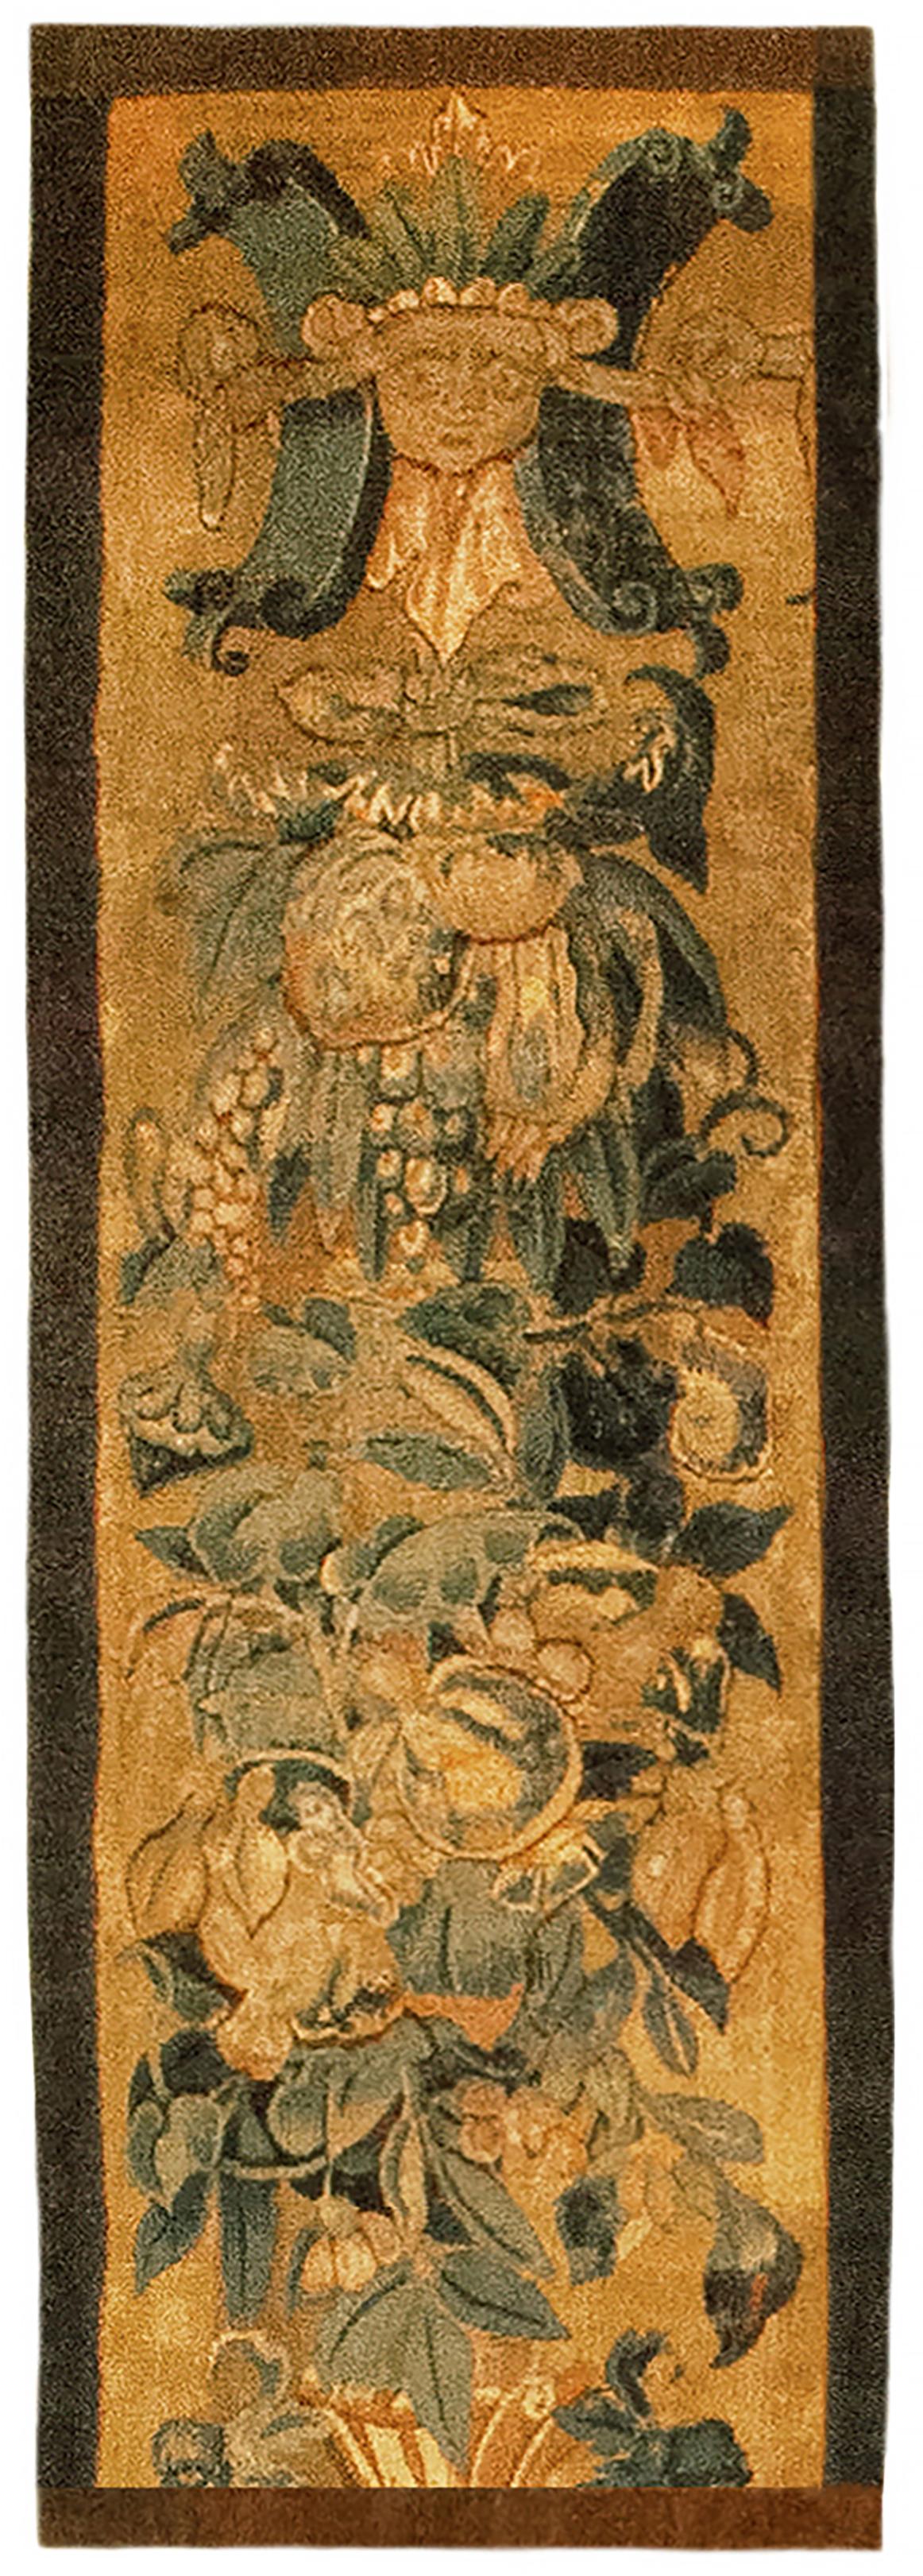 A pair of 16th century Brussels Historical Tapestry panels. This vertically oriented pair of decorative tapestry panels depicts scrolling foliate designs, with grotesques on the top, and with variety of fruiting and flowering elements below. The